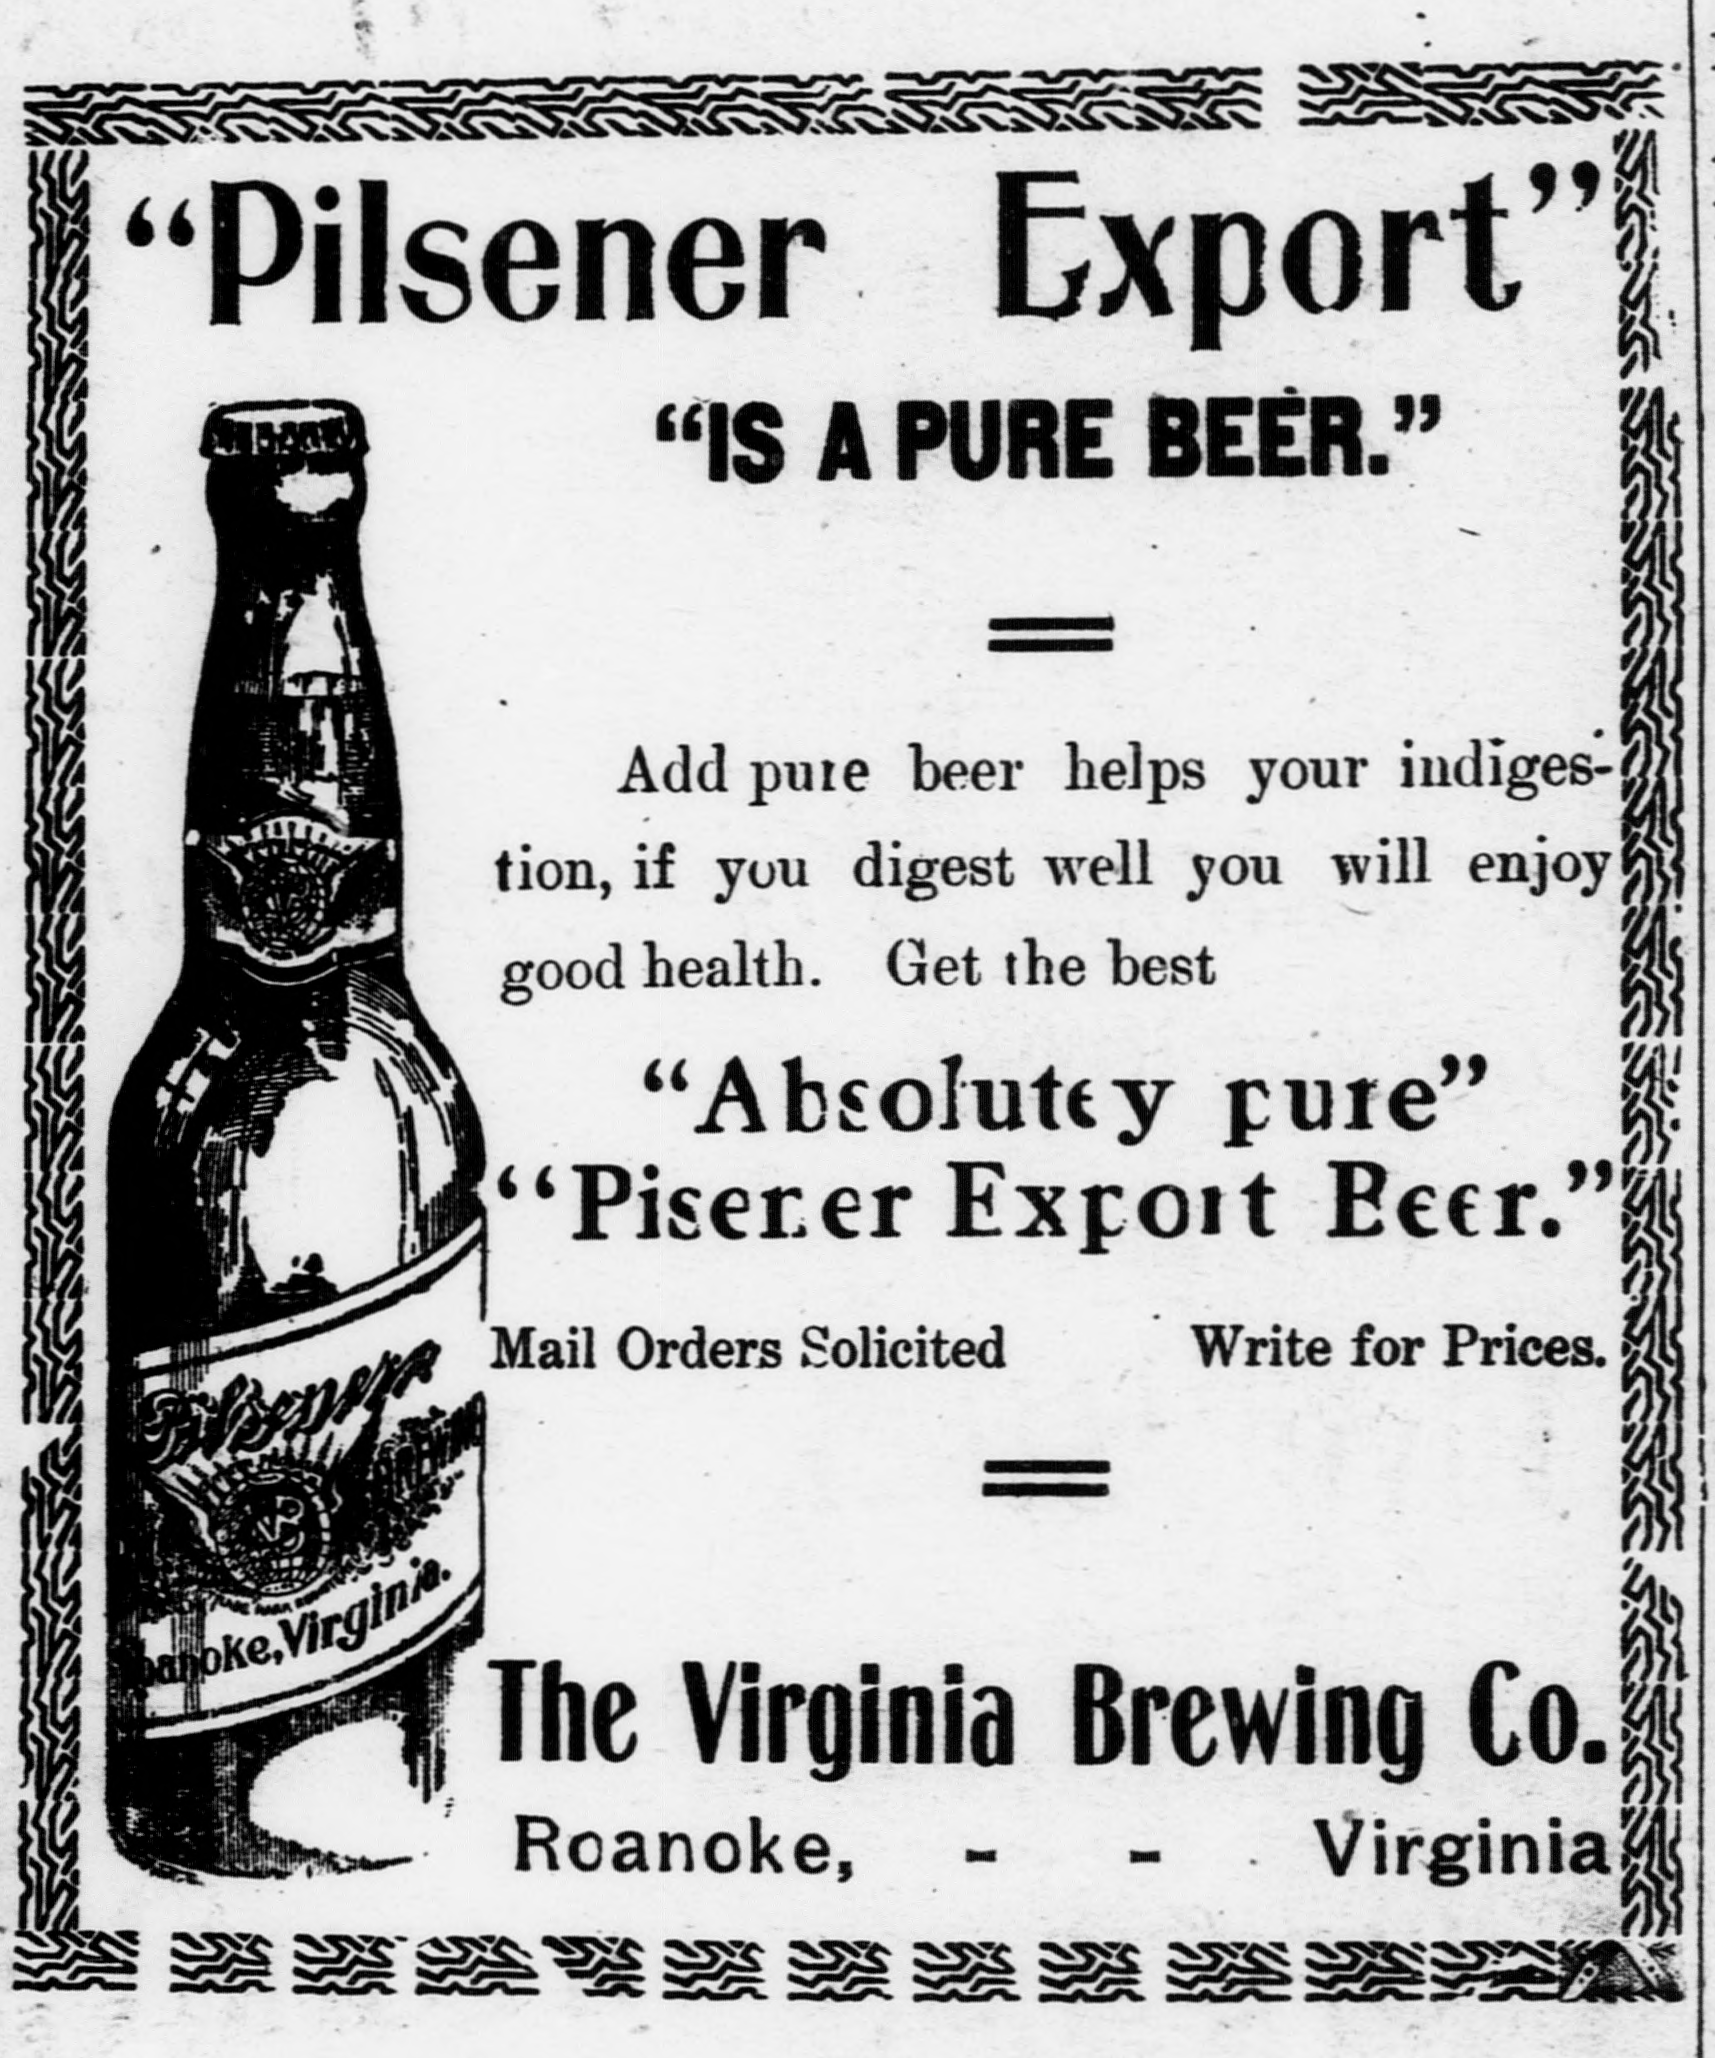 1906 ad for Virginia Brewing Co.